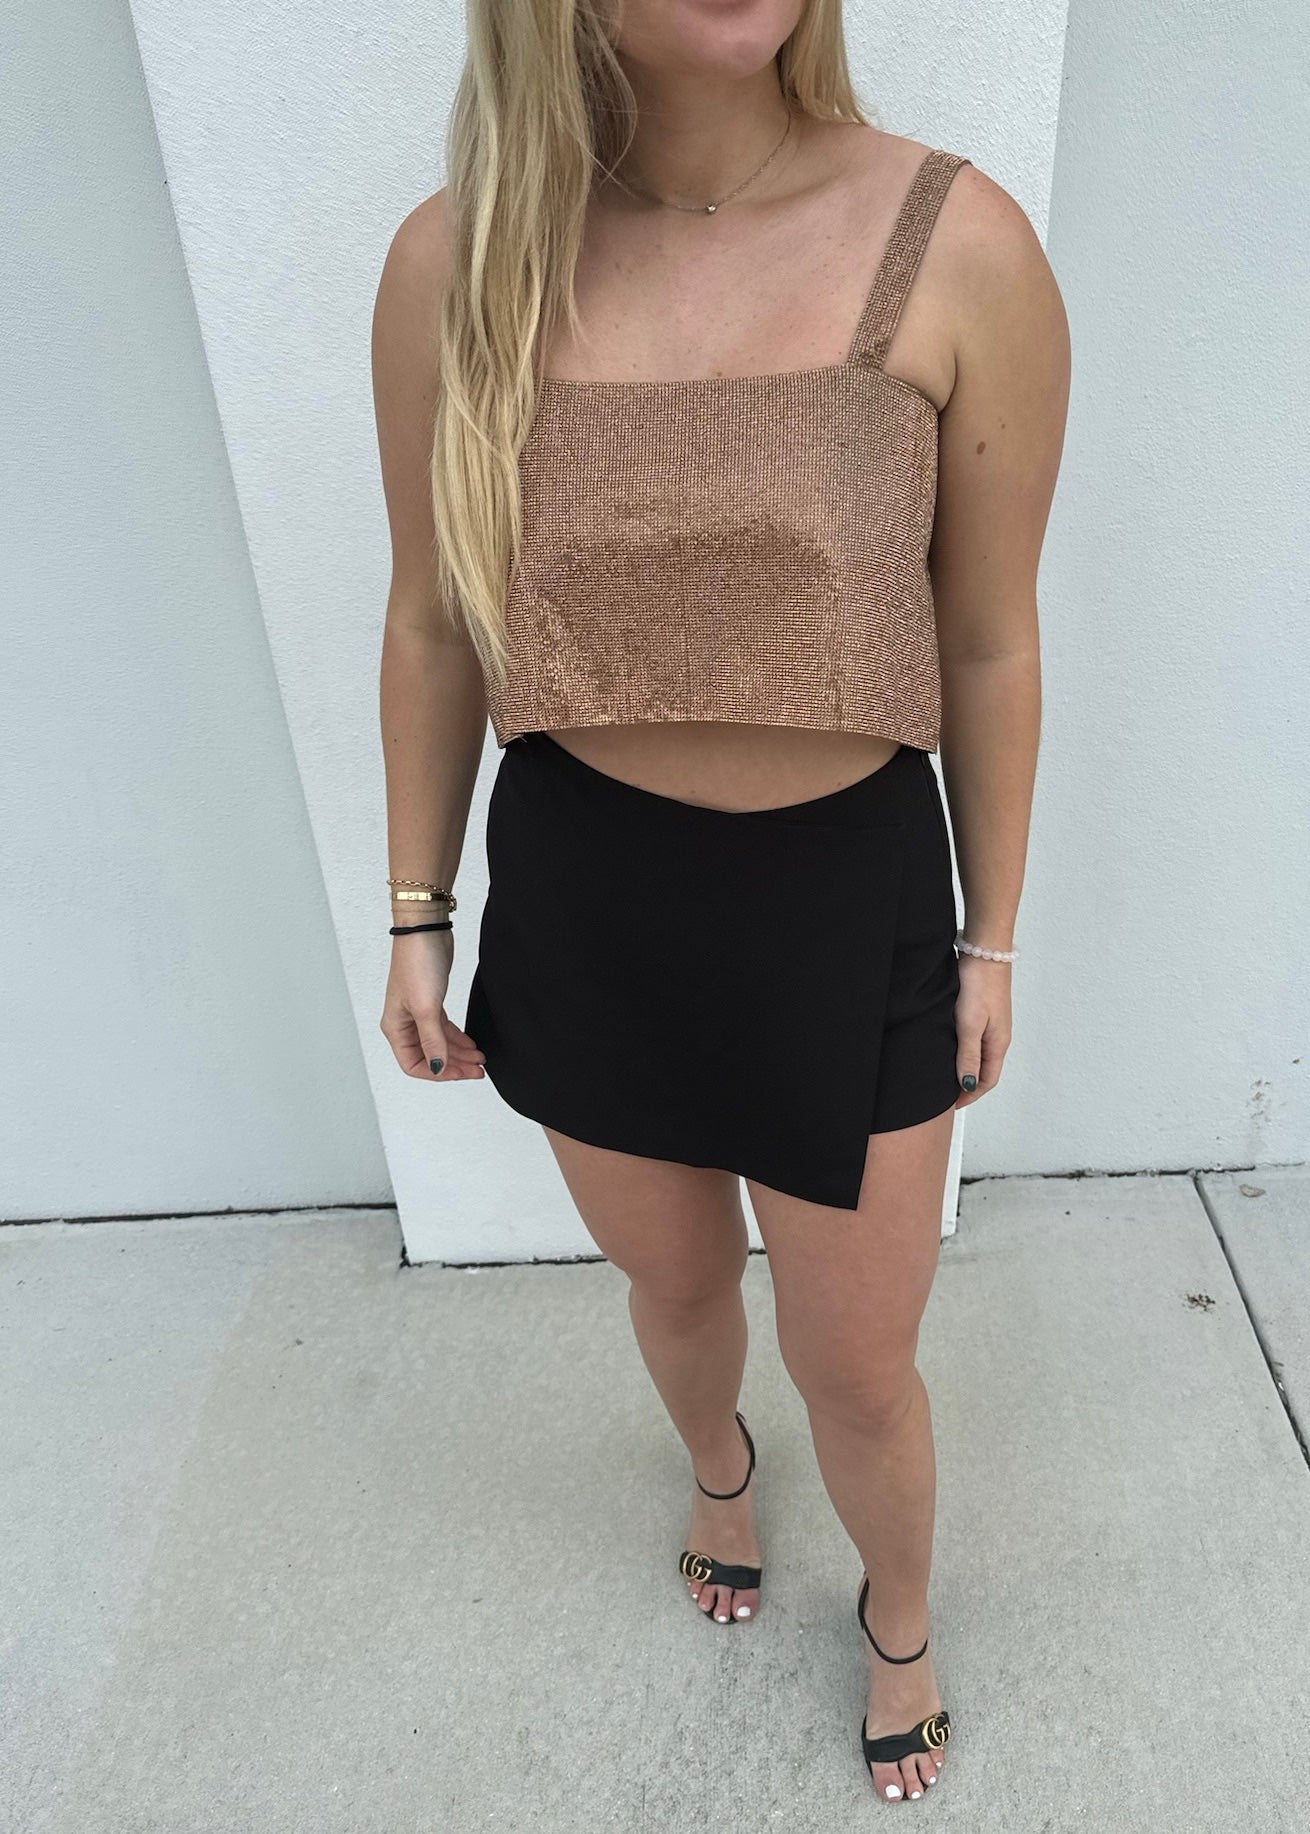 New Years on 5th: Rhinestone Cropped Top